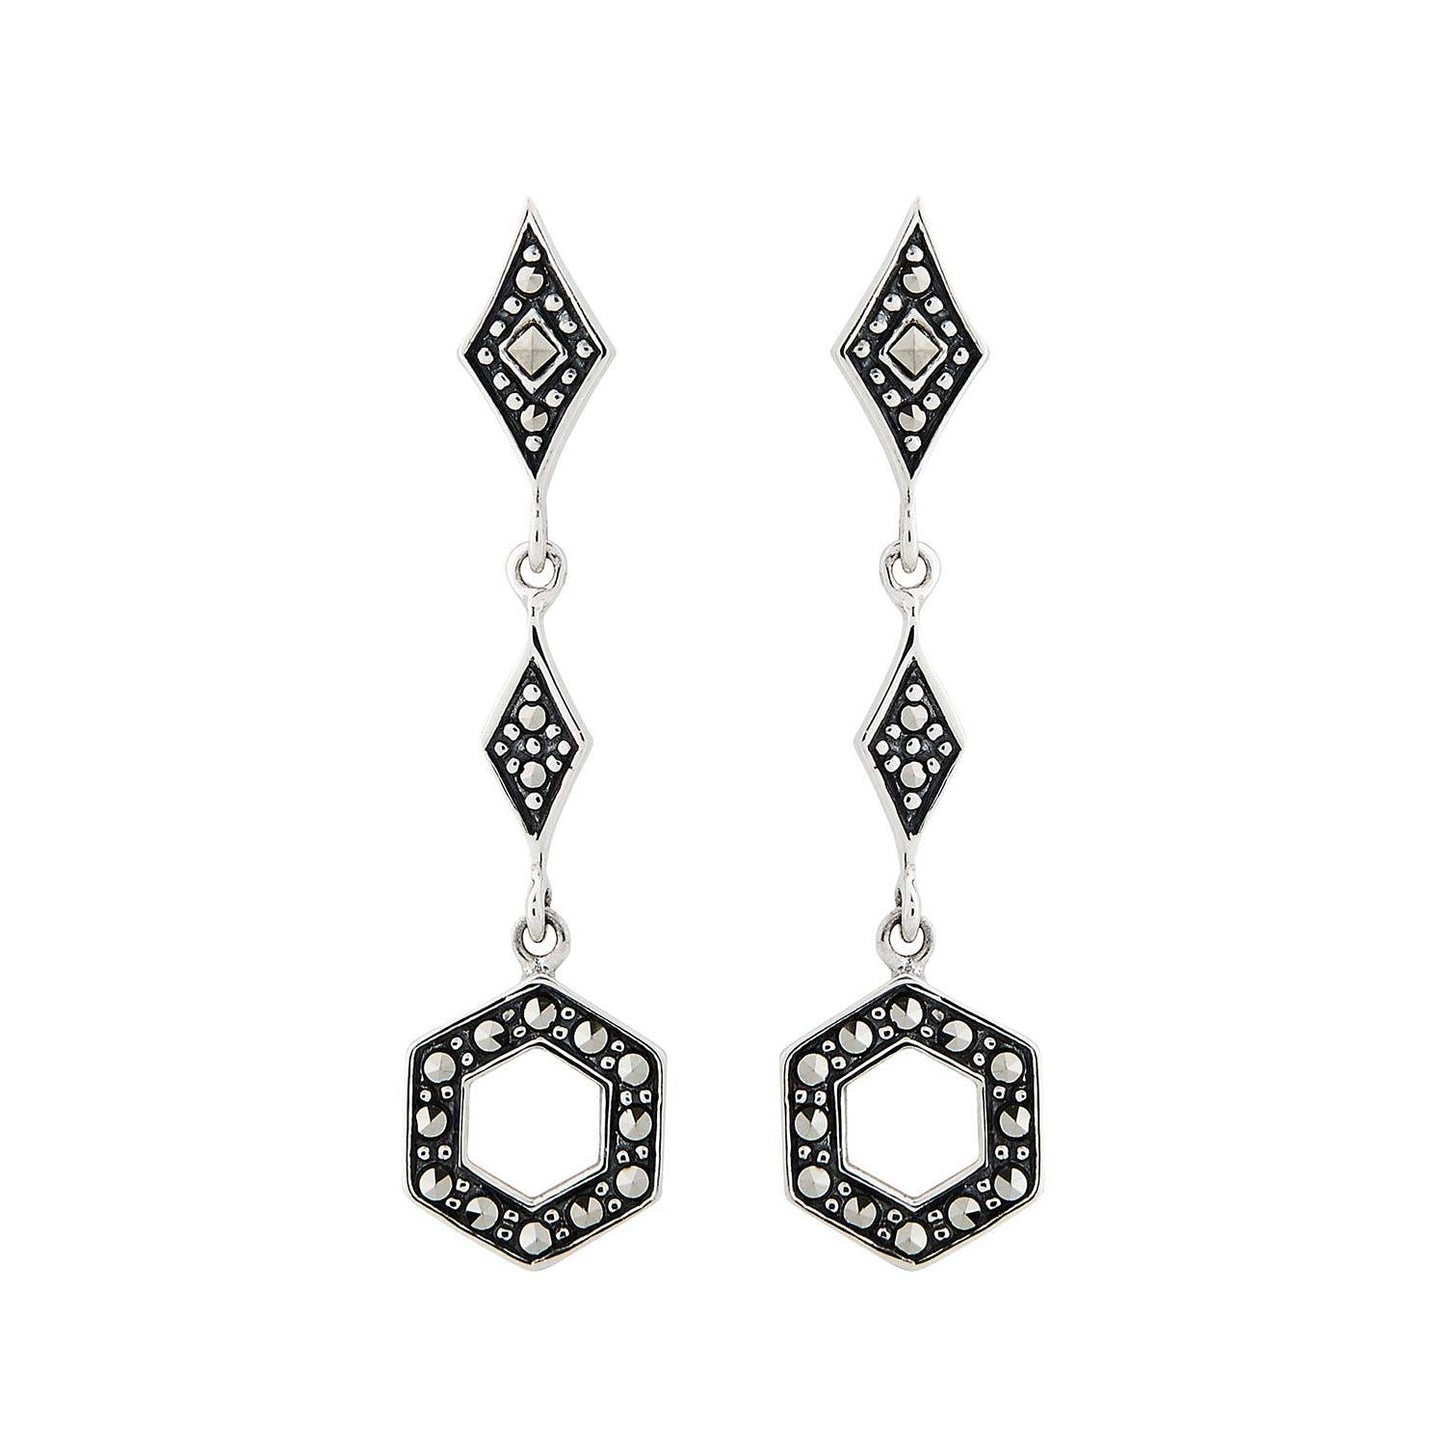 Art Deco Style Geometric Drop Earrings: Marcasite and Sterling Silver